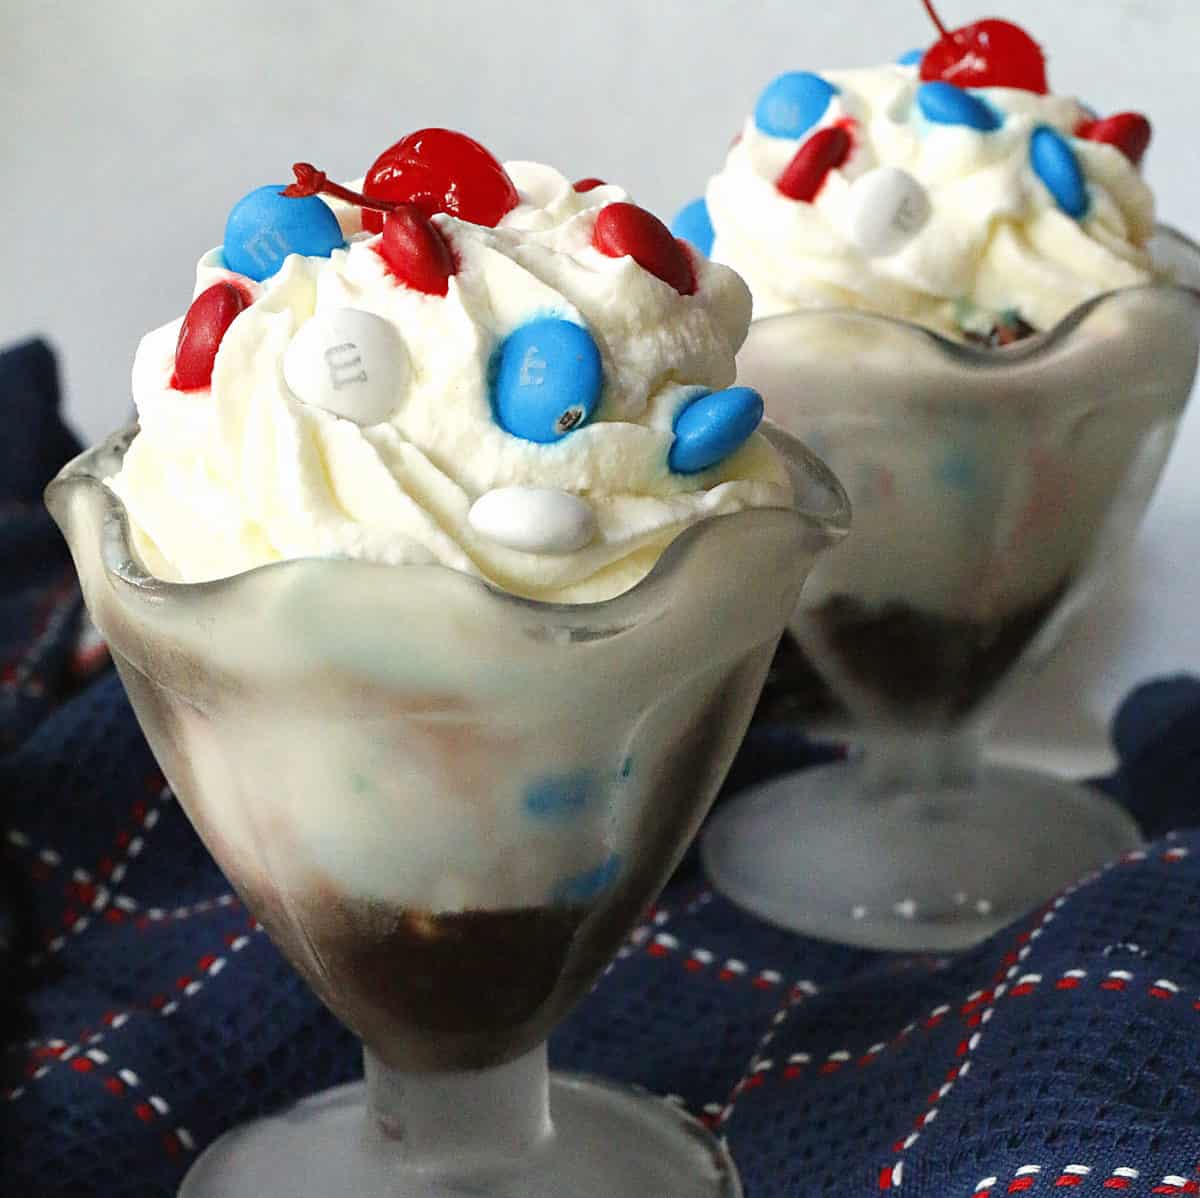 red, white & blue sundaes with M&M's